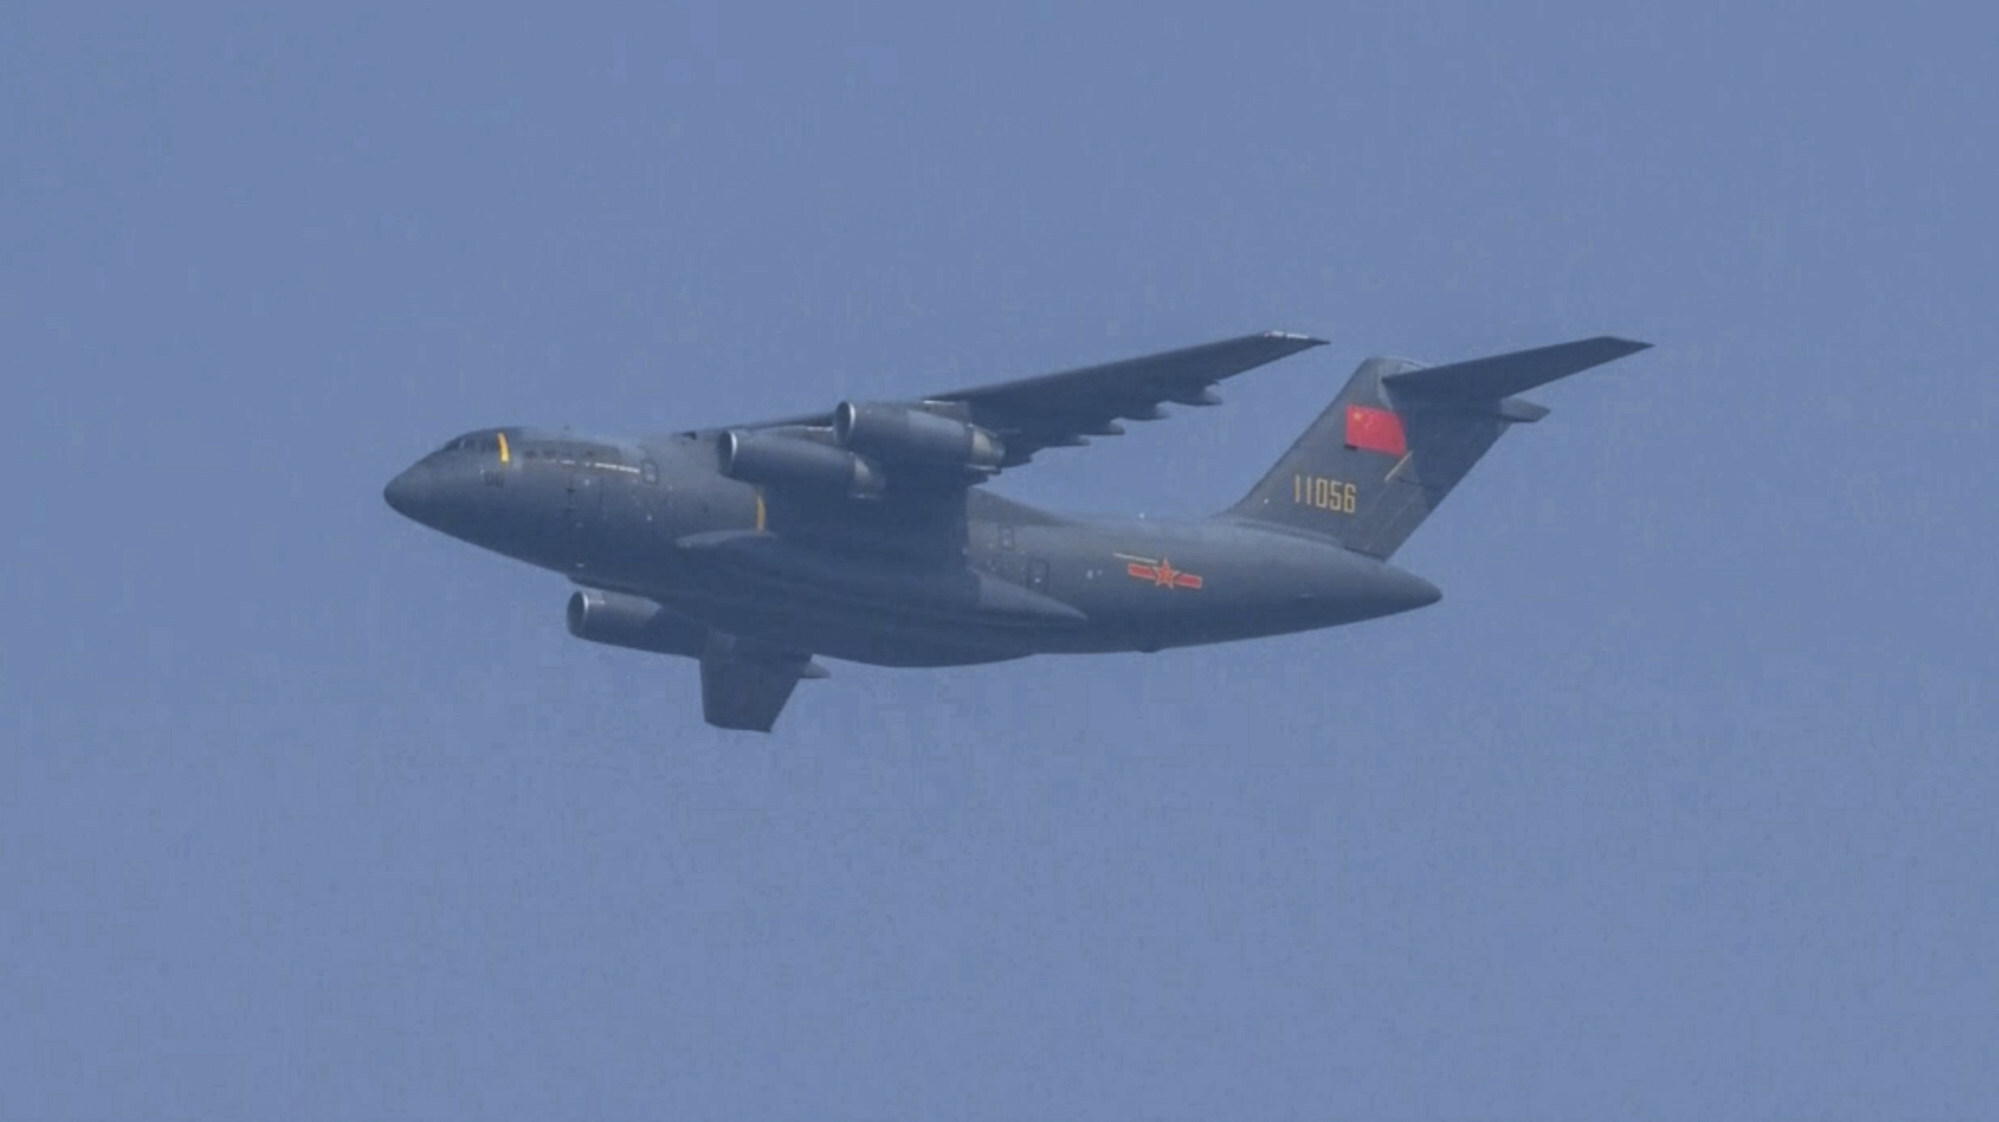 A Chinese Xian Y-20 transport aircraft, like one of those involved in the May incident near Malaysian airspace. Photo: CCTV